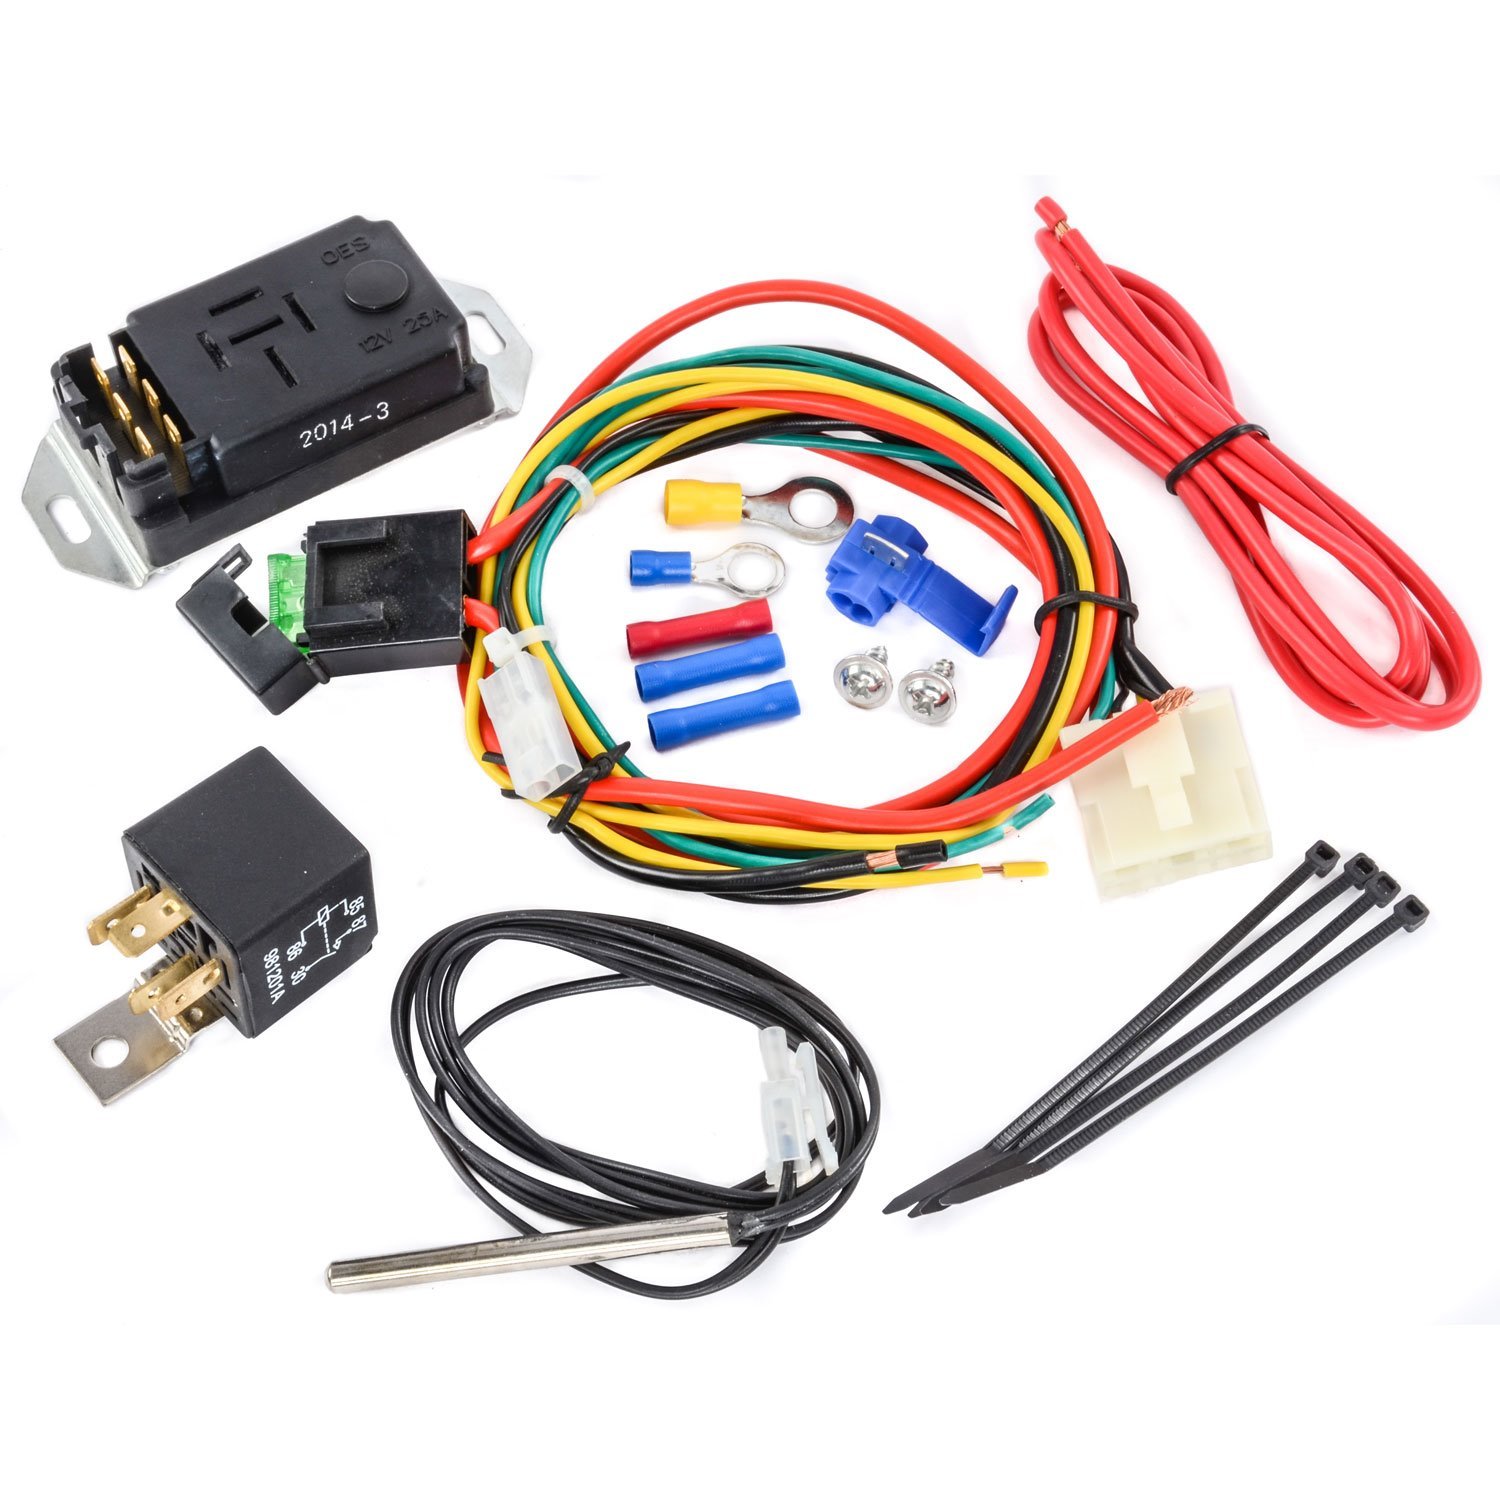 Adjustable Electric Fan Controller Kit with Push-In Temperature Probe Adjustable 150-240 Degrees F